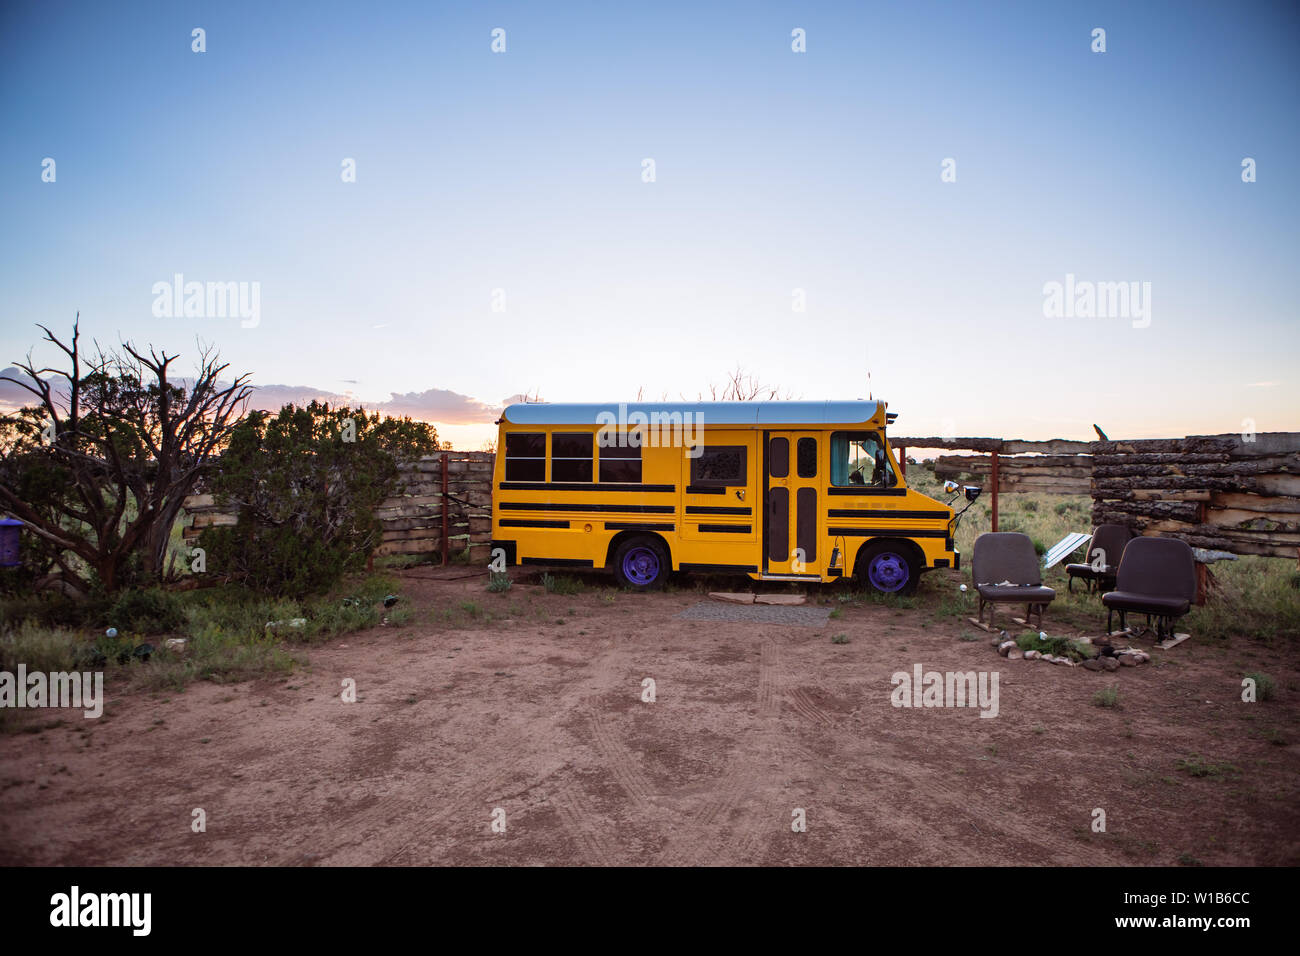 School bus lodging Alternative Eco friendly Campground Glamping 'The Nest' in Williams, Arizona, USA, near the Grand Canyon Stock Photo